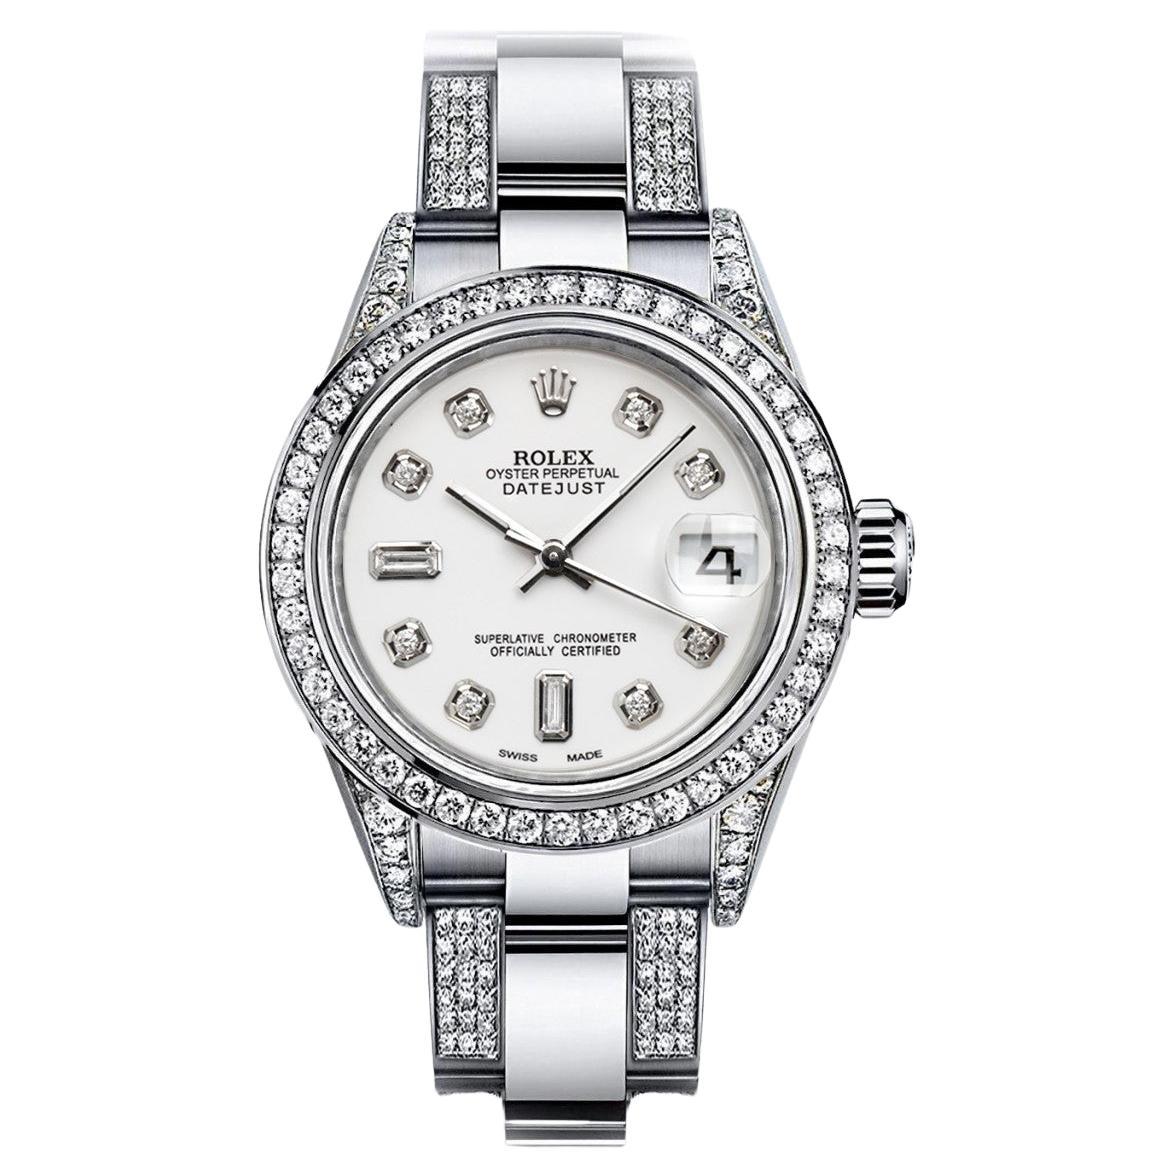 Rolex 36mm Datejust S/S White Diamond Dial Baguette Oyster Watch 16014 For Sale